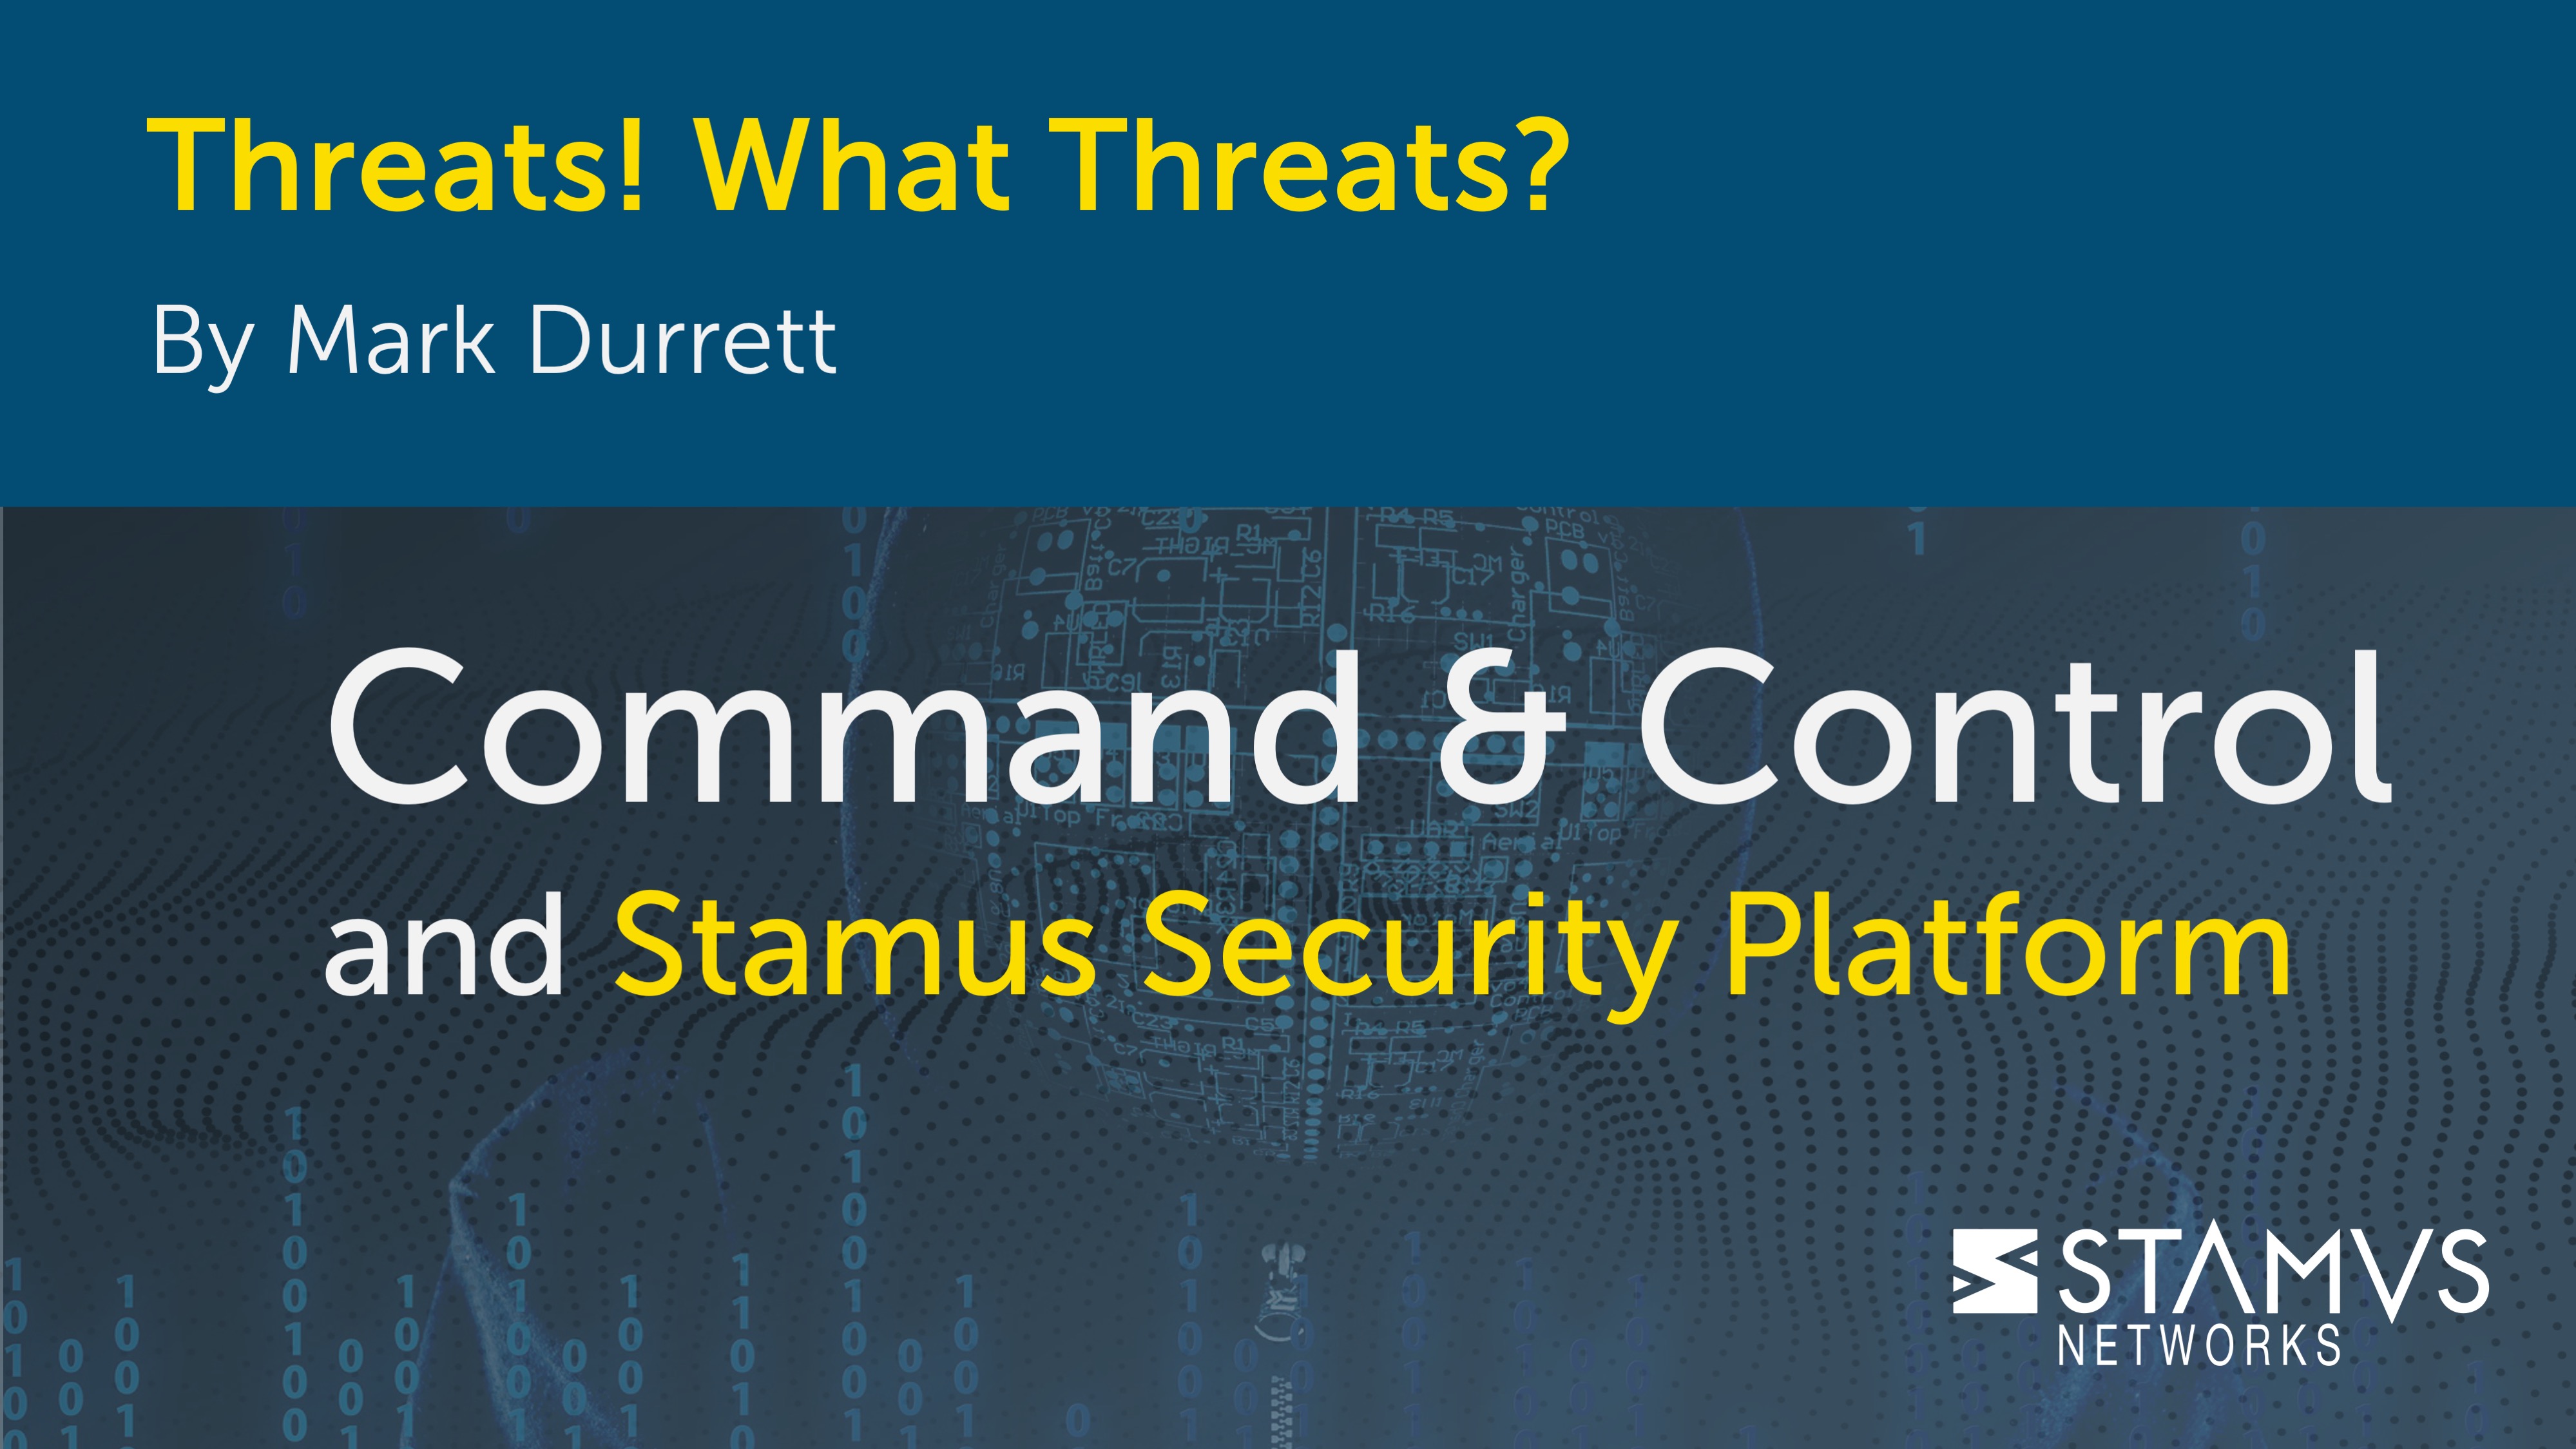 Threats! What Threats? Command & Control and Stamus Security Platform